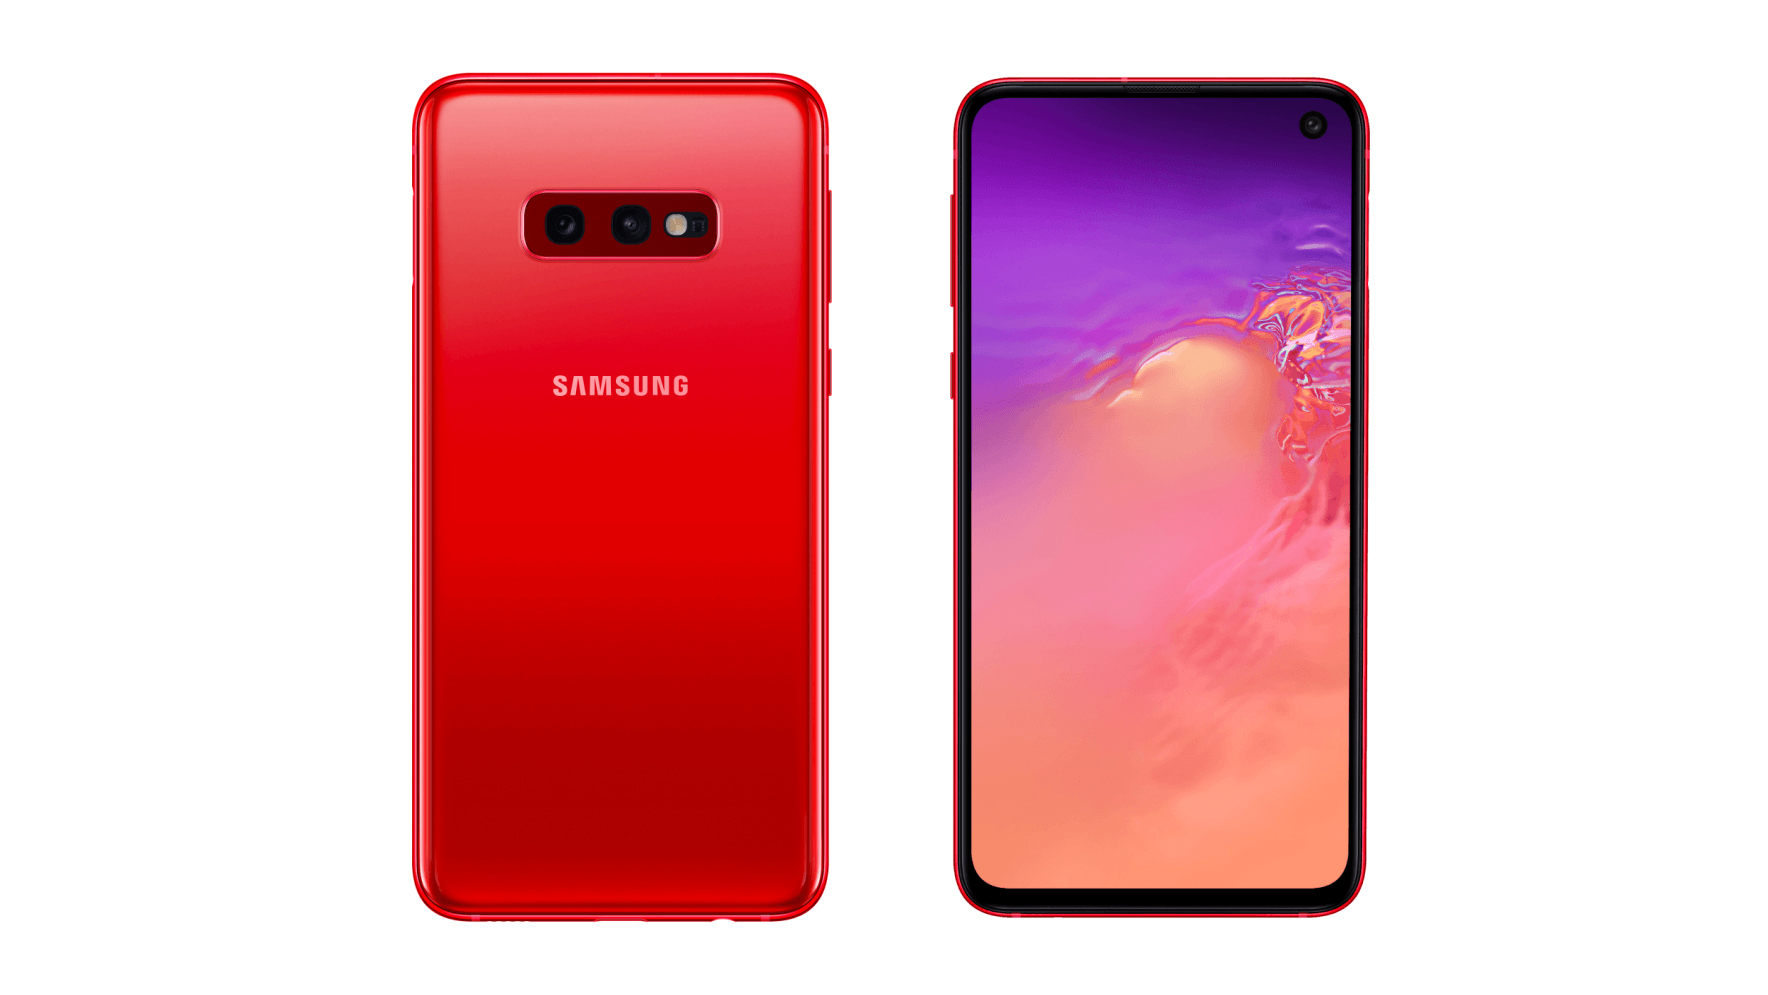 Leaked renders of the Samsung Galaxy S10e in the Cardinal Red colorway.